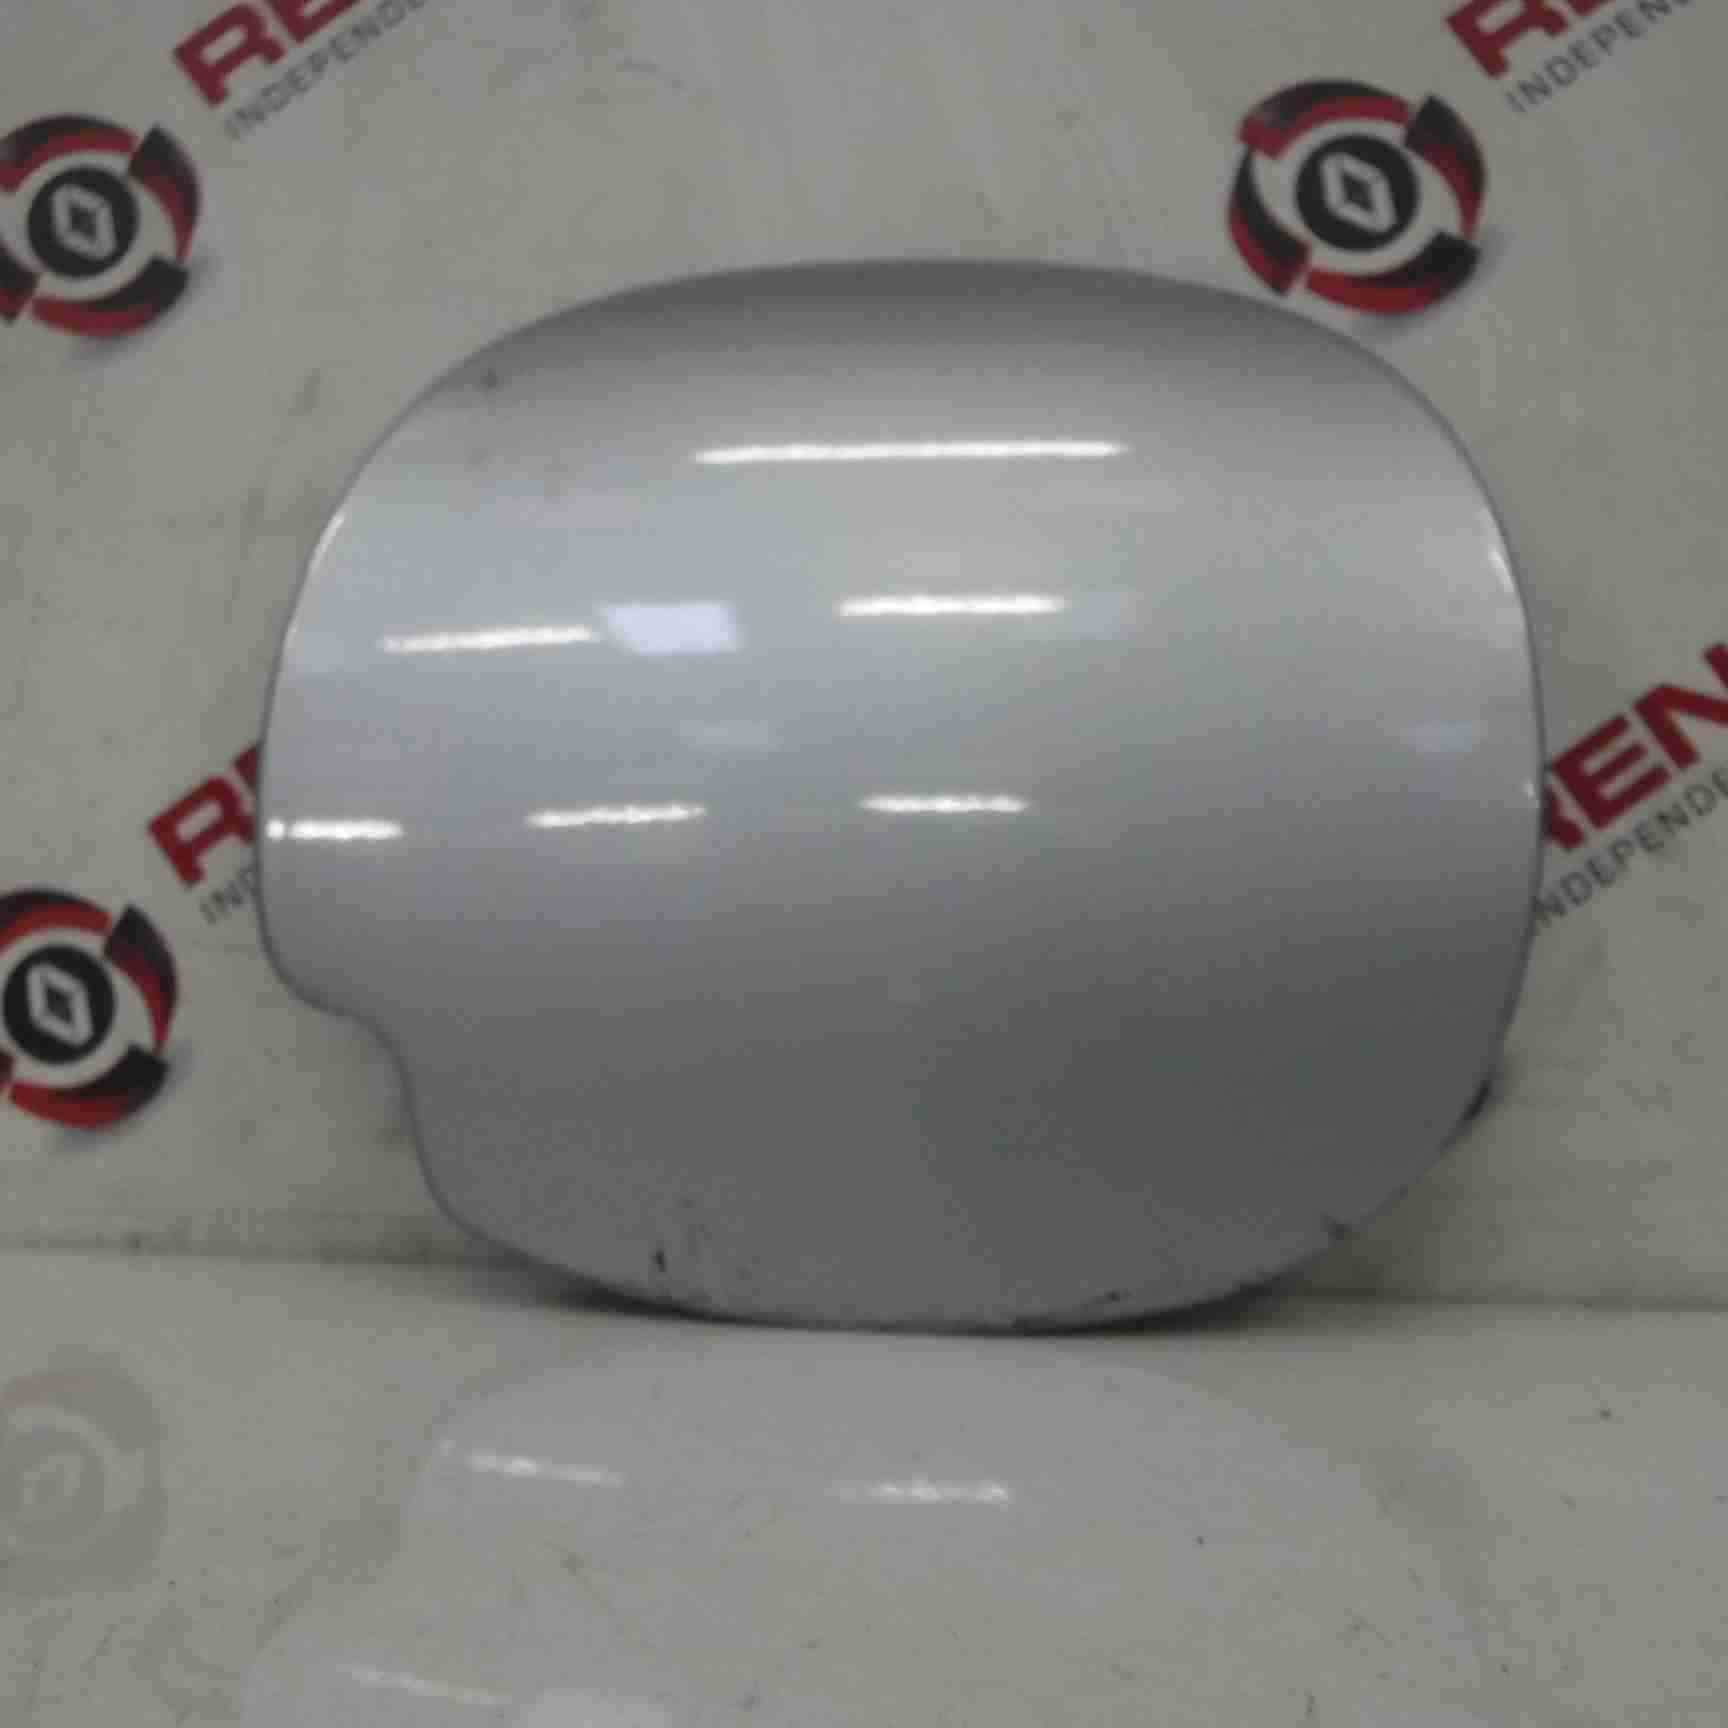 Renault Clio Sport 2001-2006 172 182 Fuel Flap Cover Silver 640 7700836756